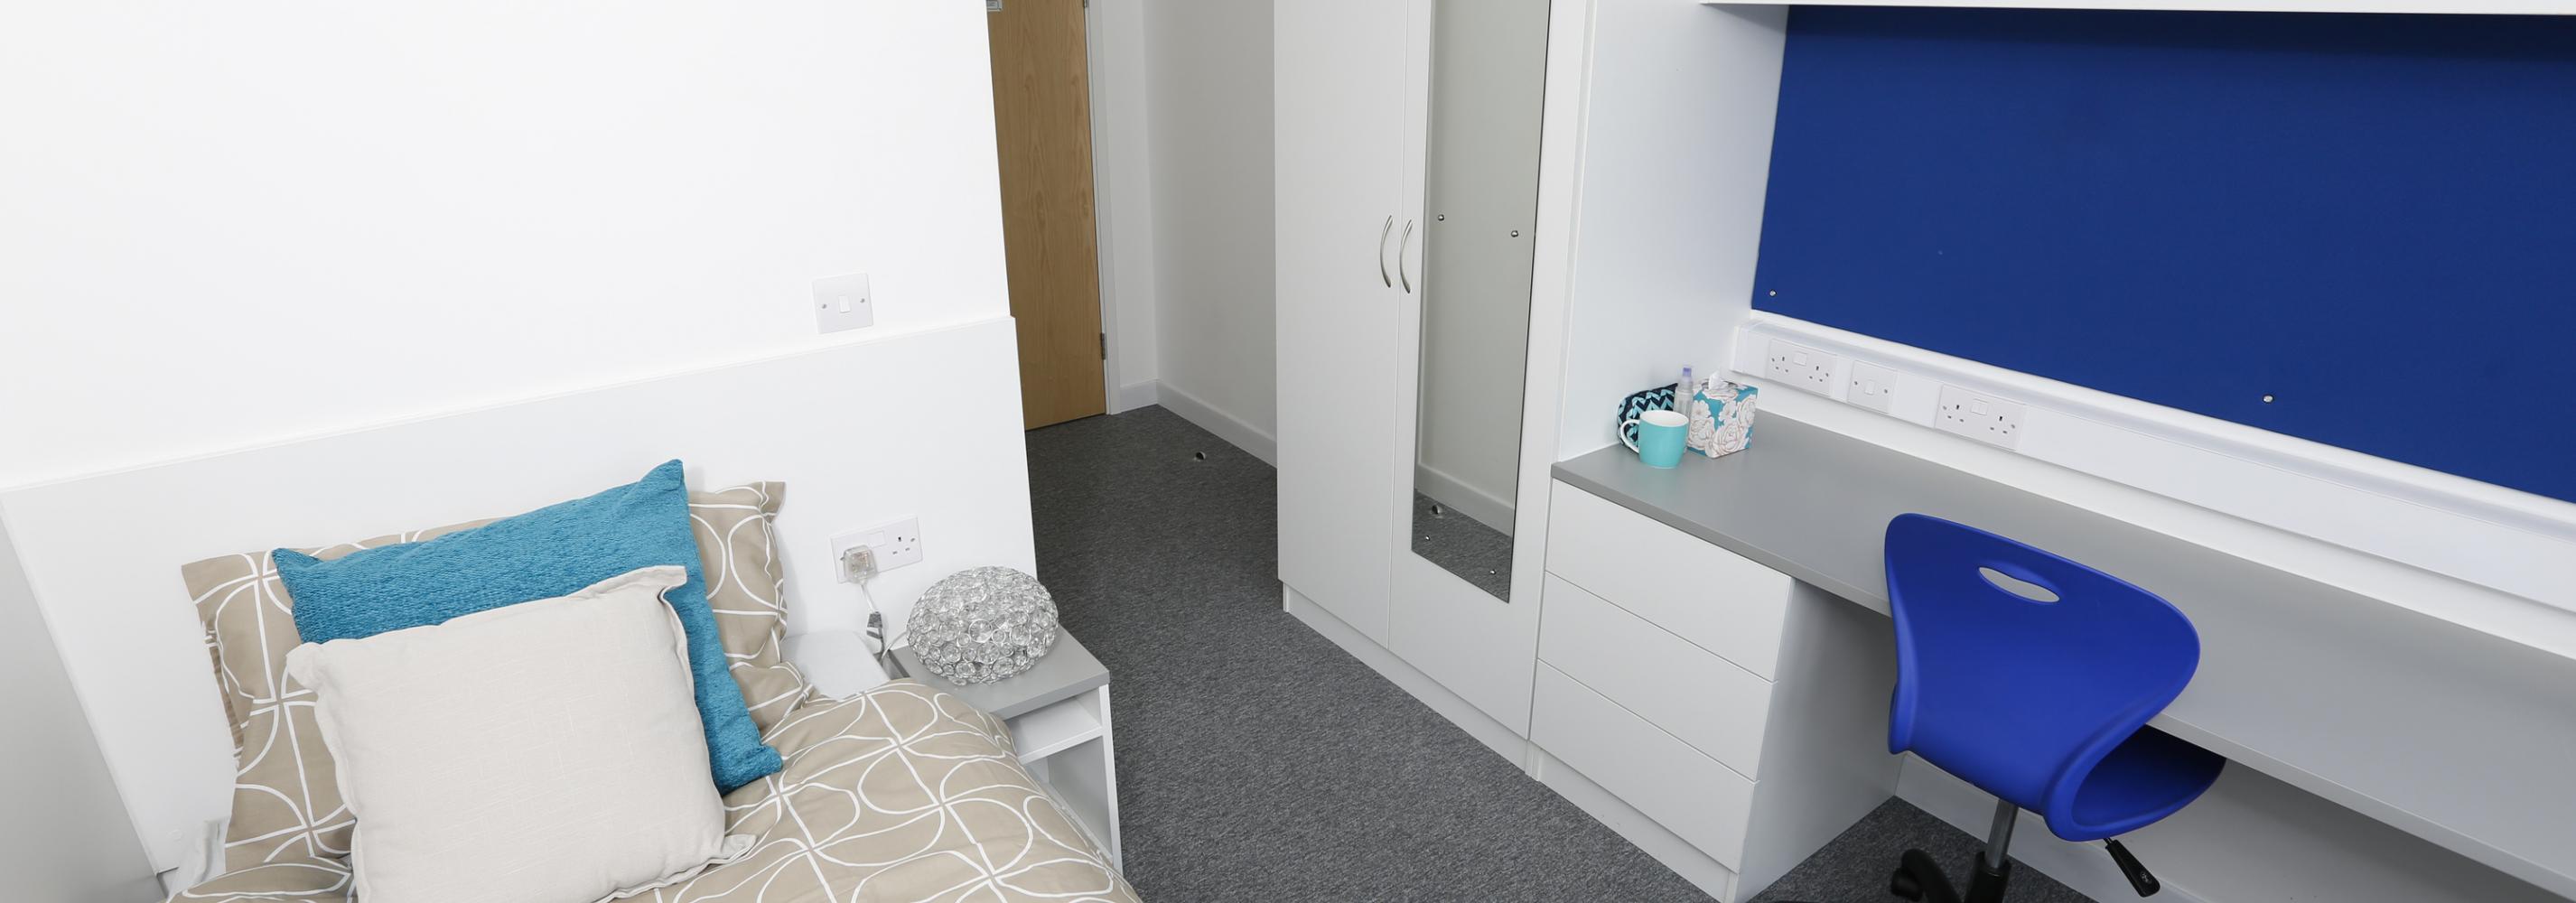 Standard ensuite room with a single bed, desk, swivel chair and shelving